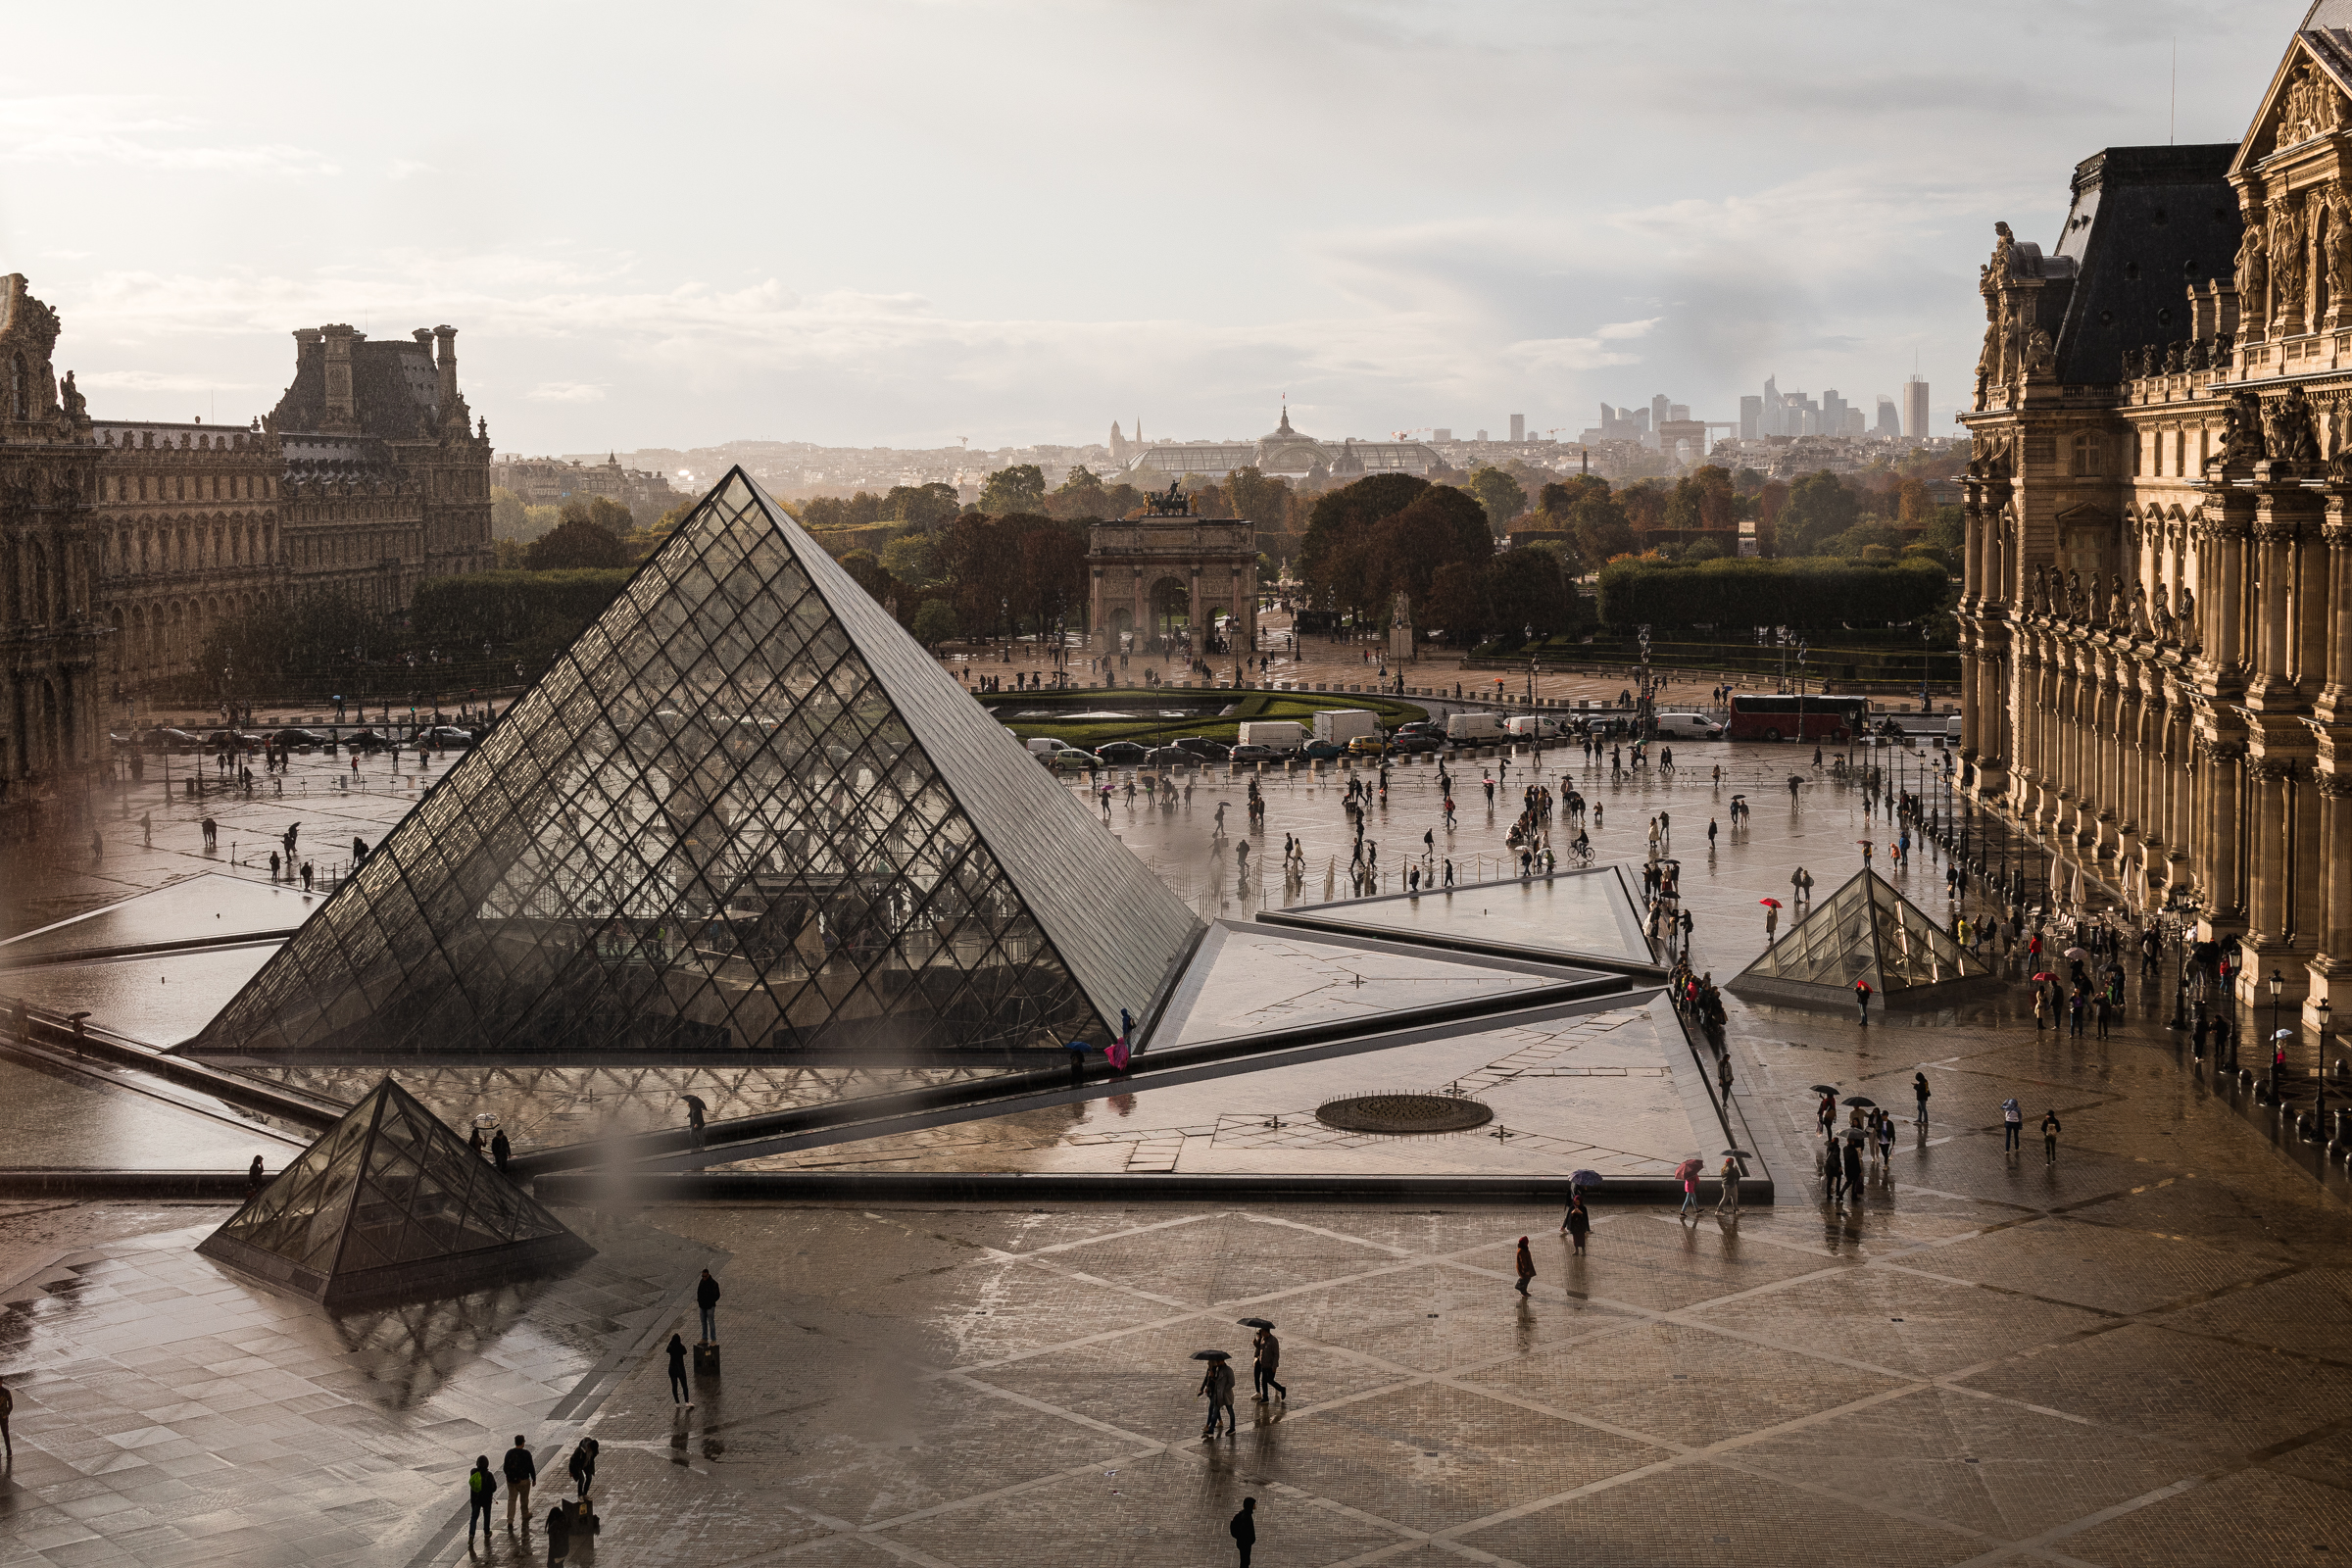 A wide shot of the Louvre's pyramid entrance, shot from the upper floors so you can see the square surrounding it.